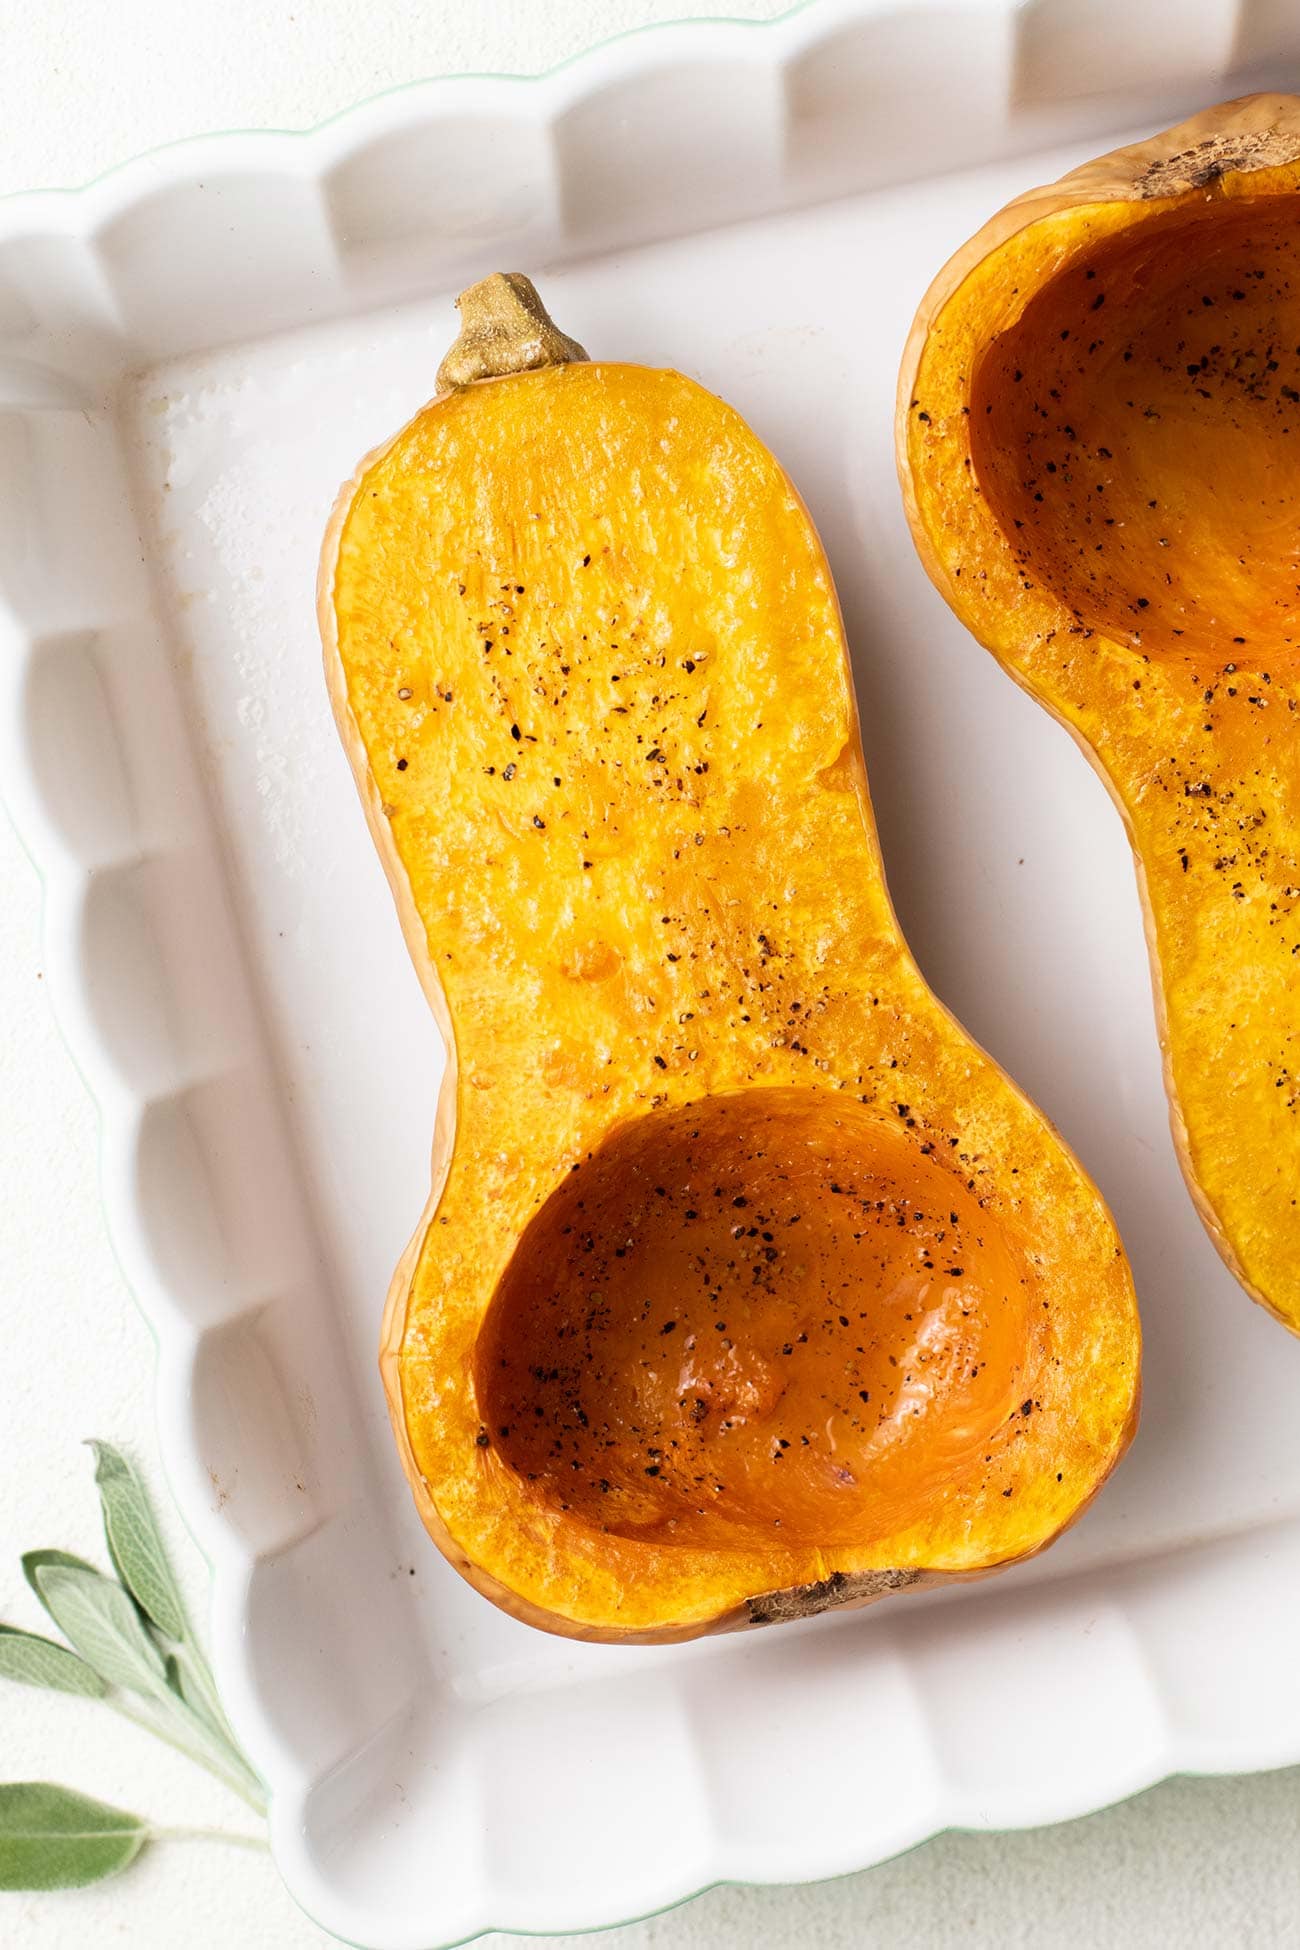 A roasted butternut squash shown in a baking dish.